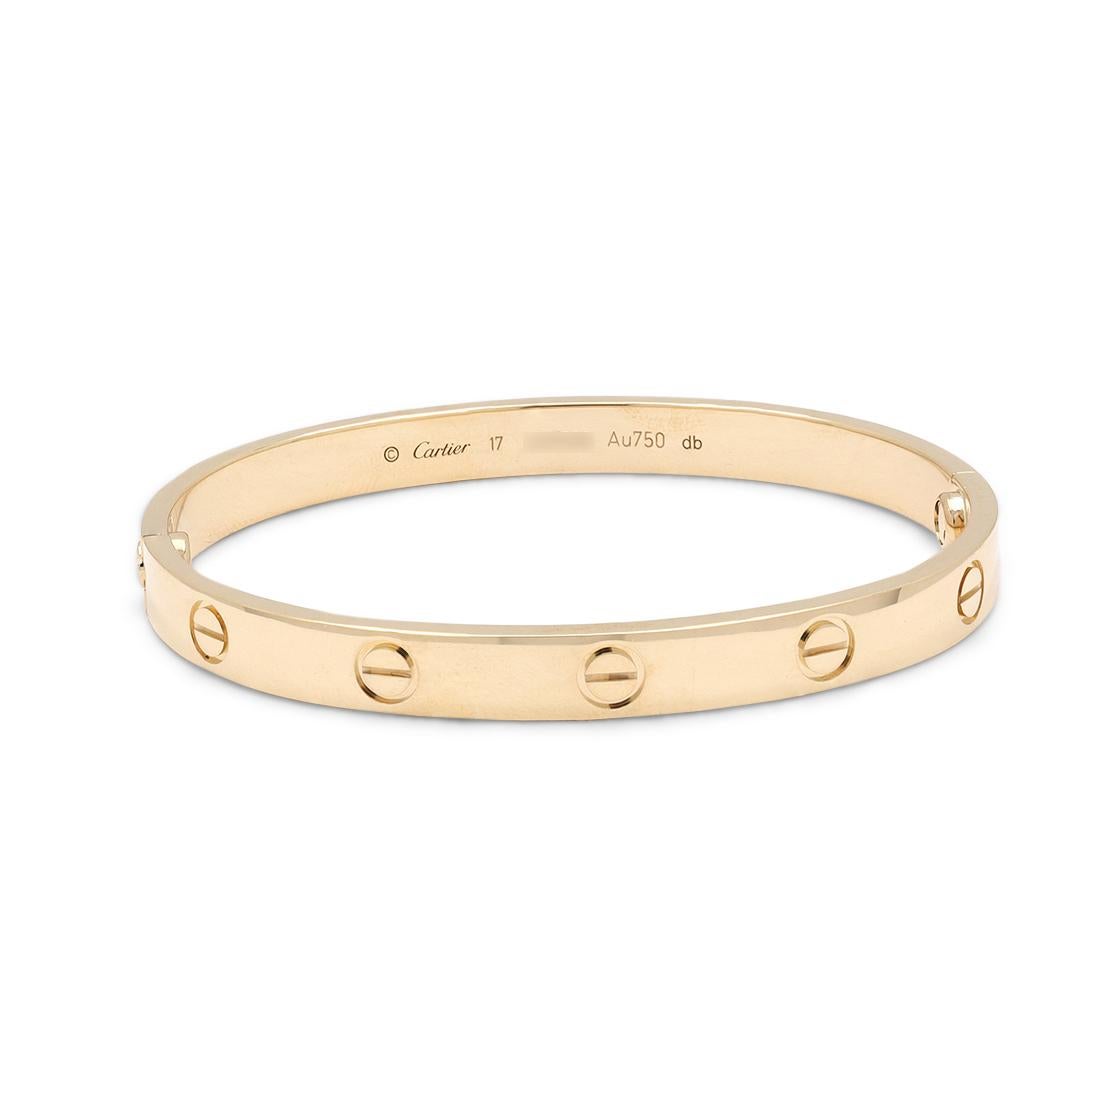 Authentic Cartier 'Love' bracelet crafted in 18 karat yellow gold. Size 17. Signed Cartier, 17, Au750, with serial number and hallmarks. The bracelet is presented with the original papers and box. CIRCA 2020s.

Brand: Cartier
Collection: Love
Metal: